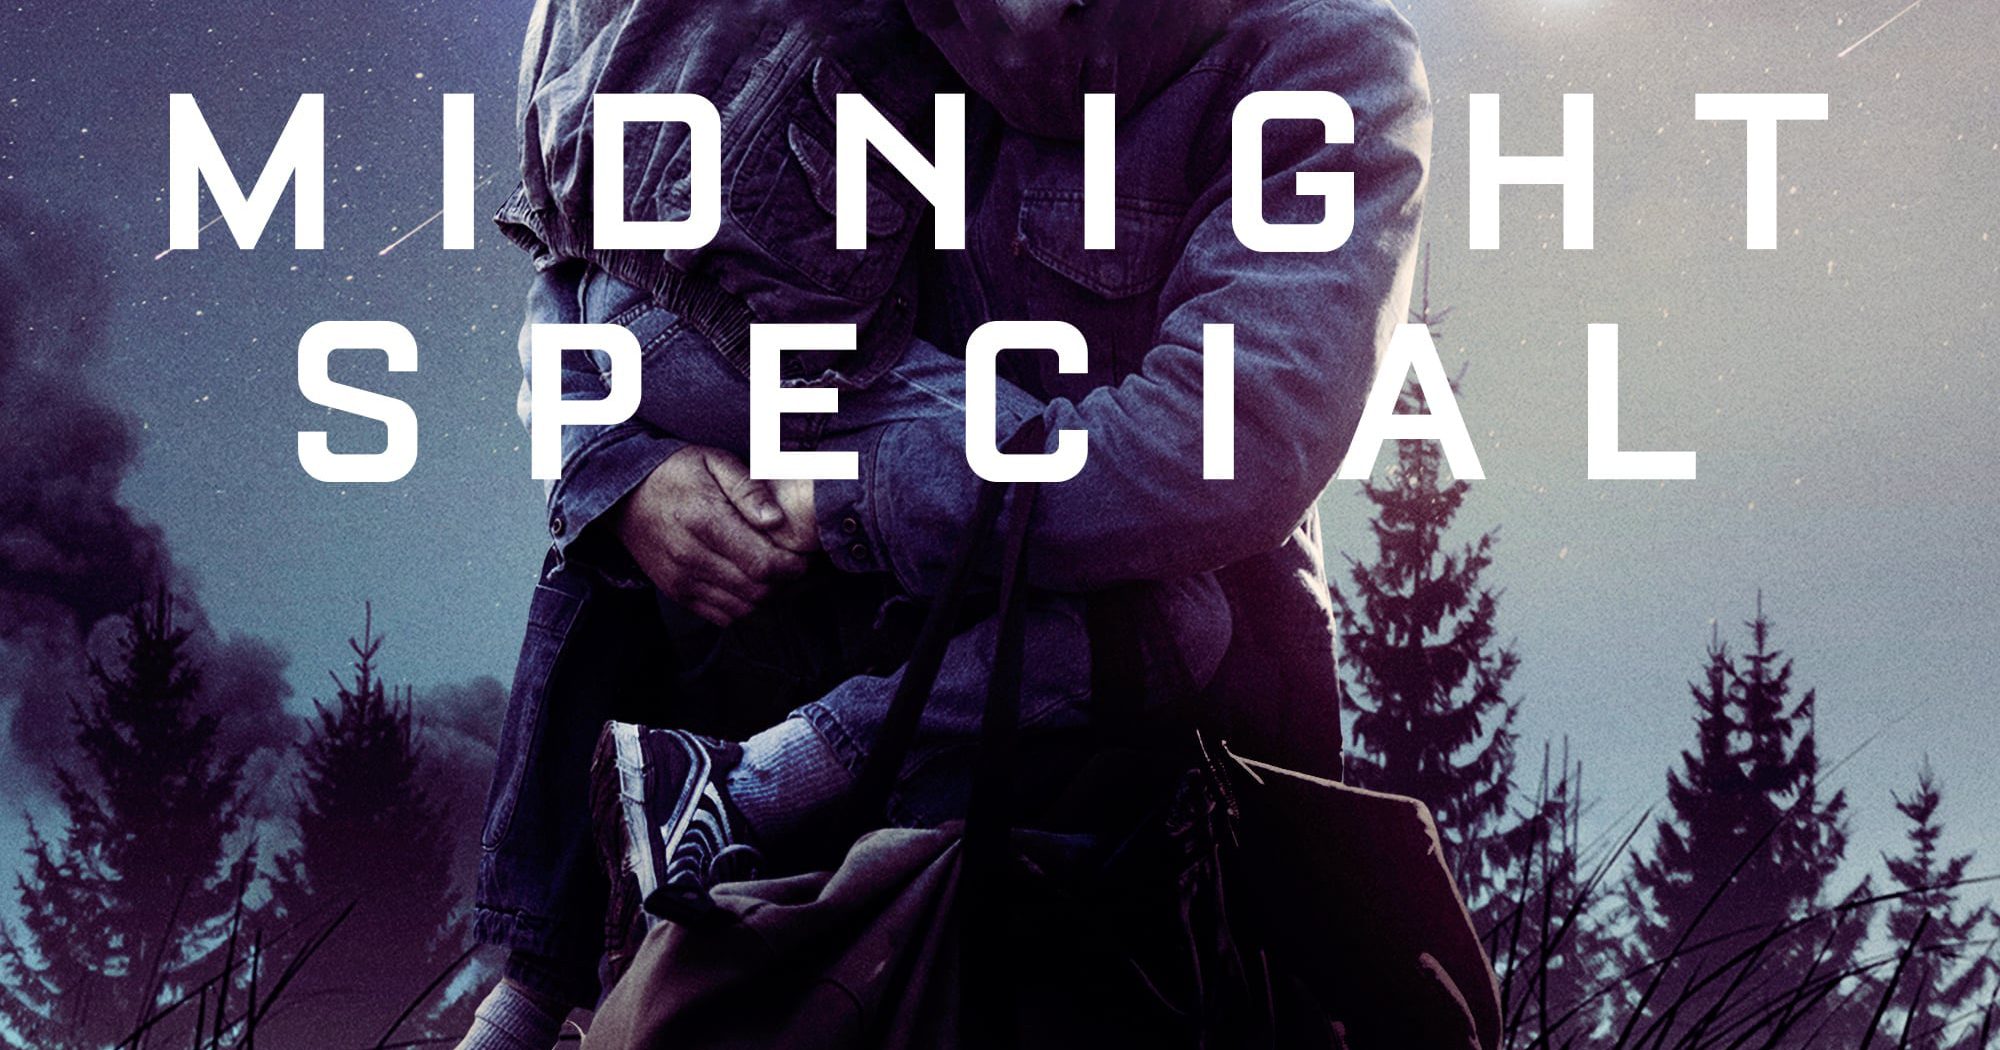 Poster for the movie "Midnight Special"